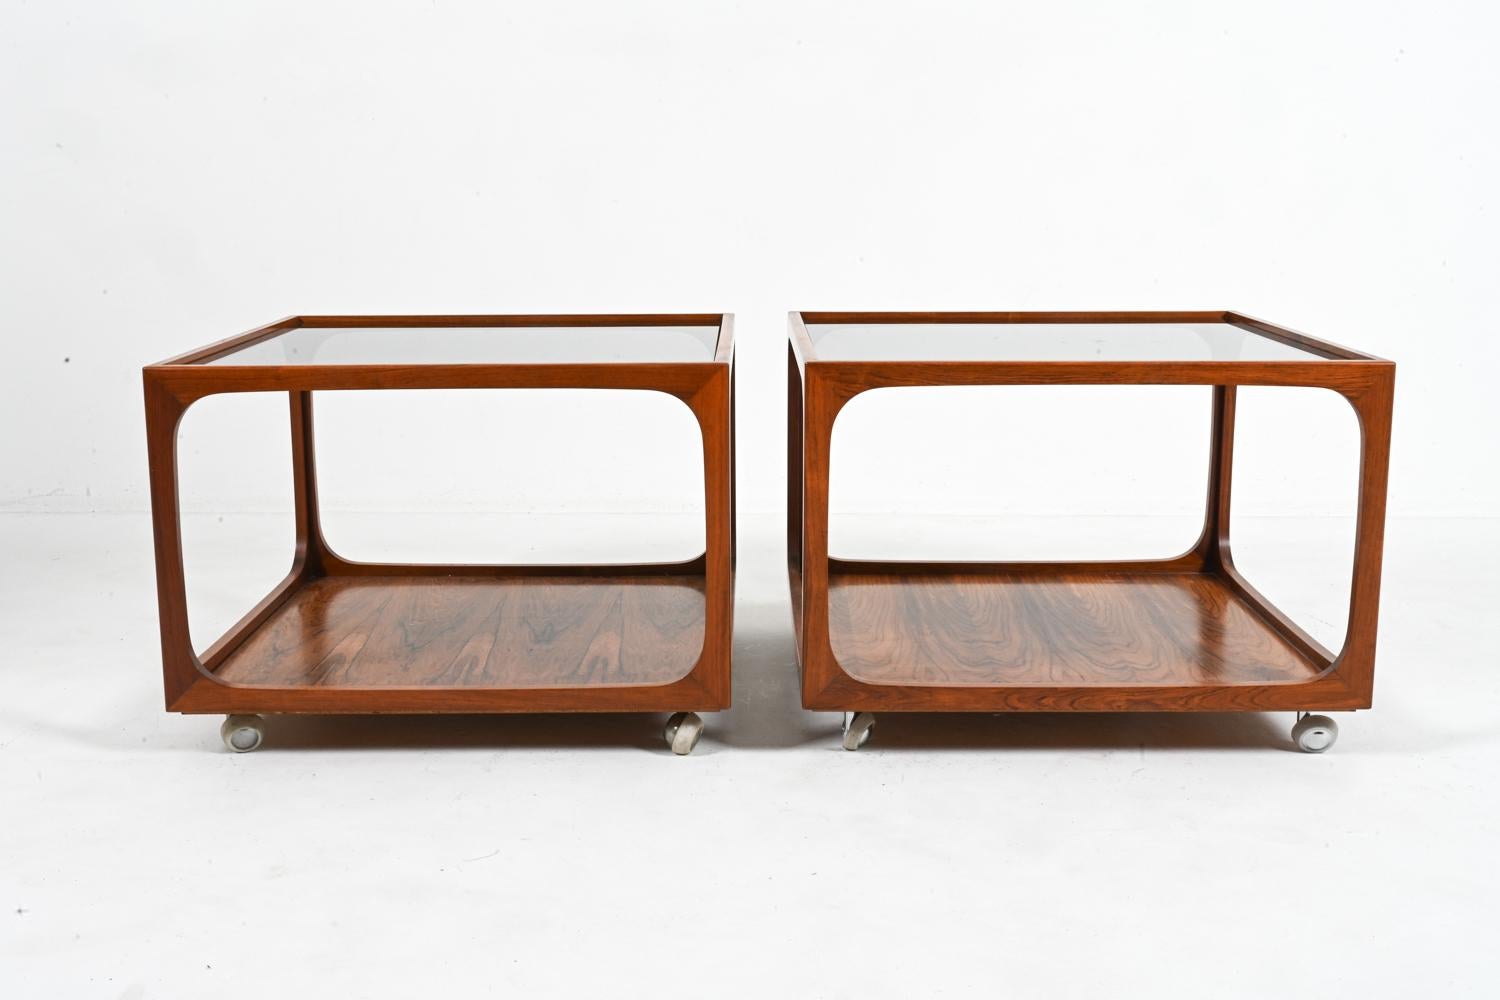 Rare Pair of Rosewood & Smoked Glass Cube End Tables Attributed to Wilhelm Renz For Sale 6